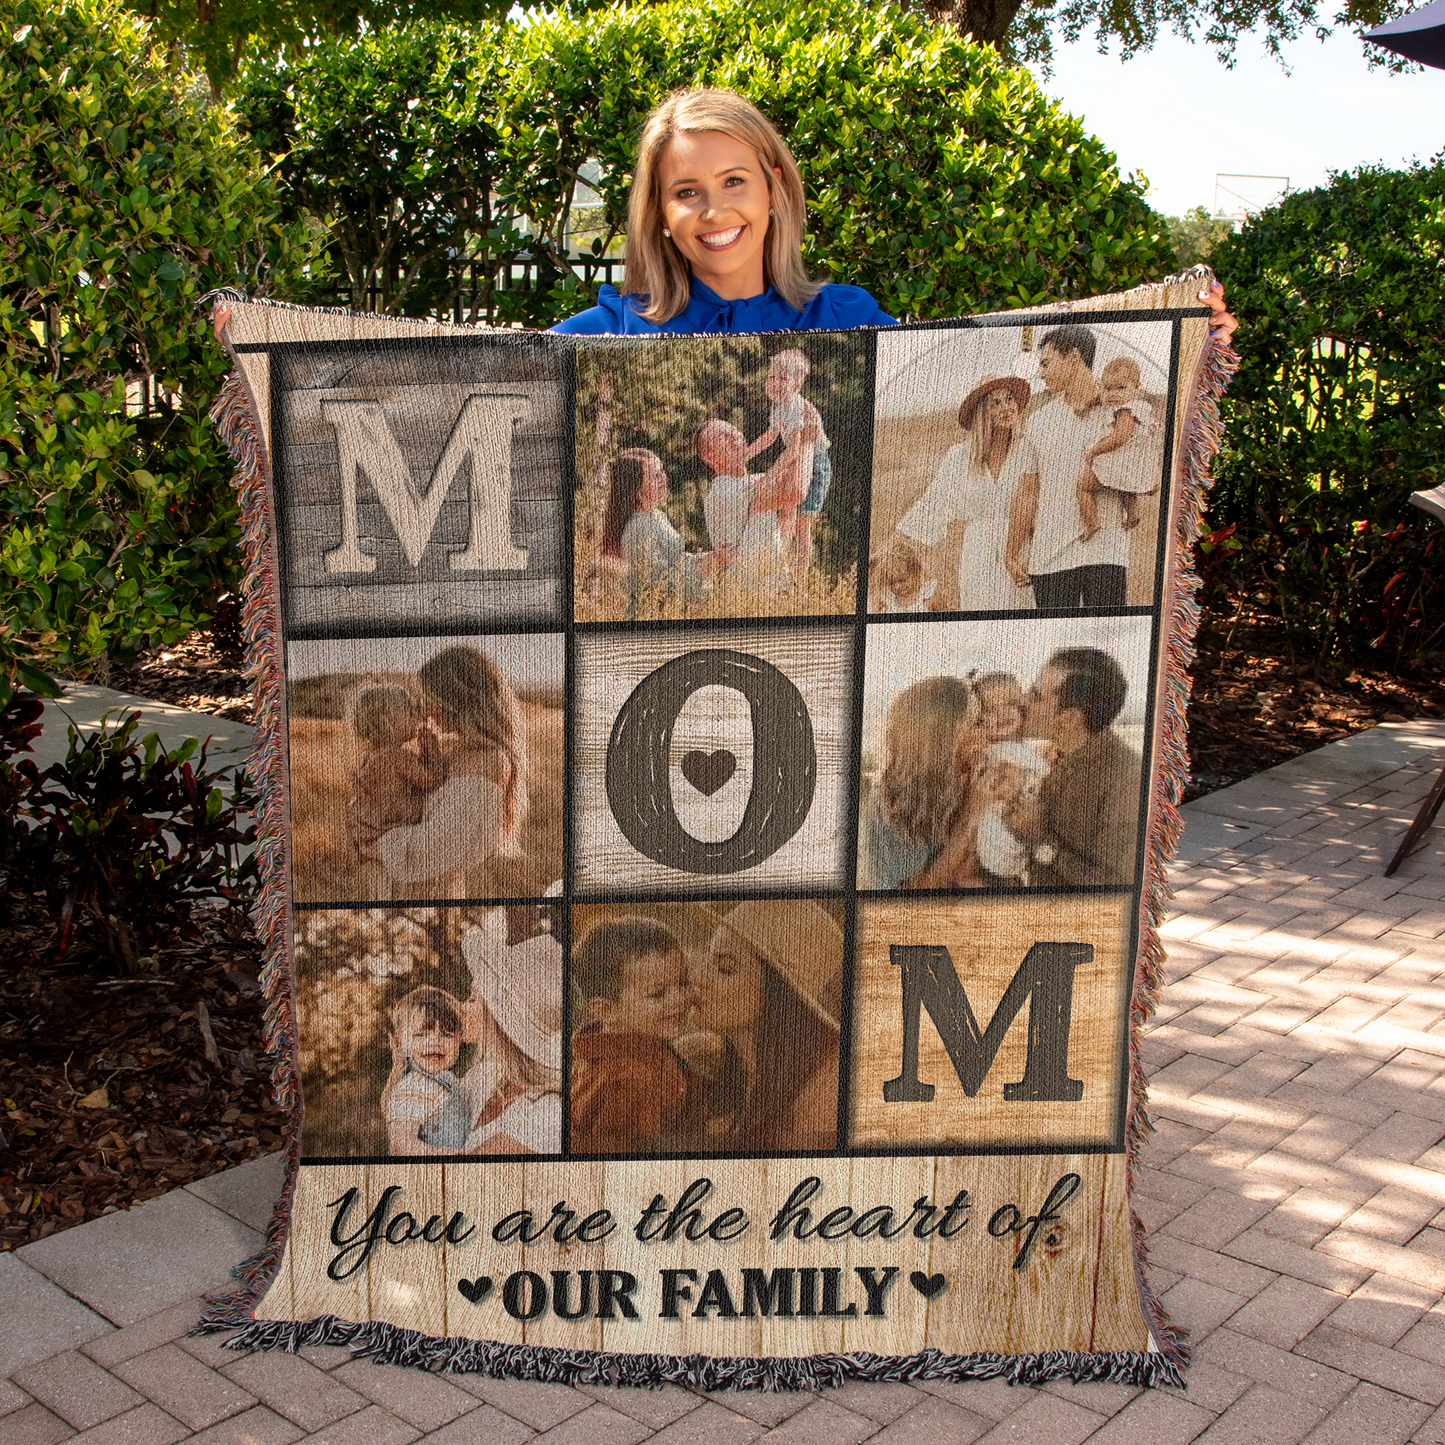 ''You are the heart of our family'' - Personalized Photo Heirloom Woven Blanket